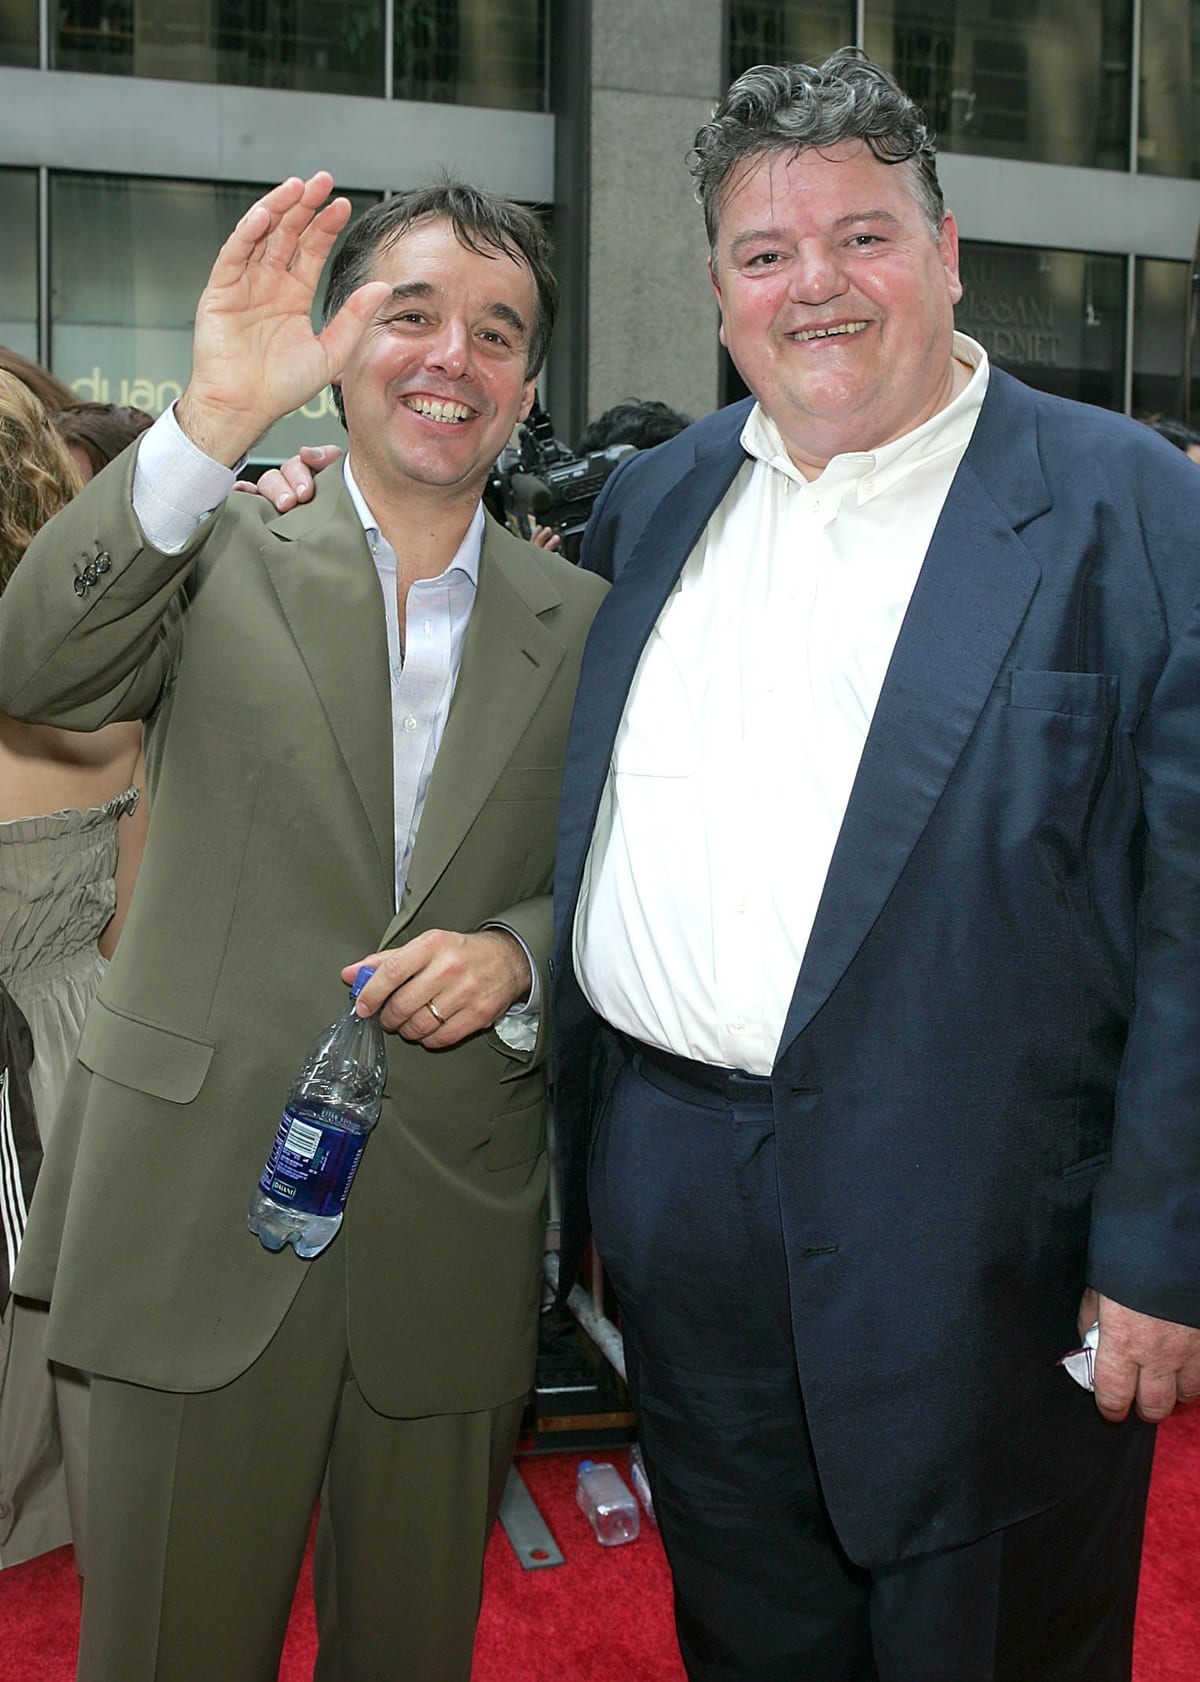 Chris Columbus and Robbie Coltrane at the premiere of 'Harry Potter and The Prisoner of Azkaban'